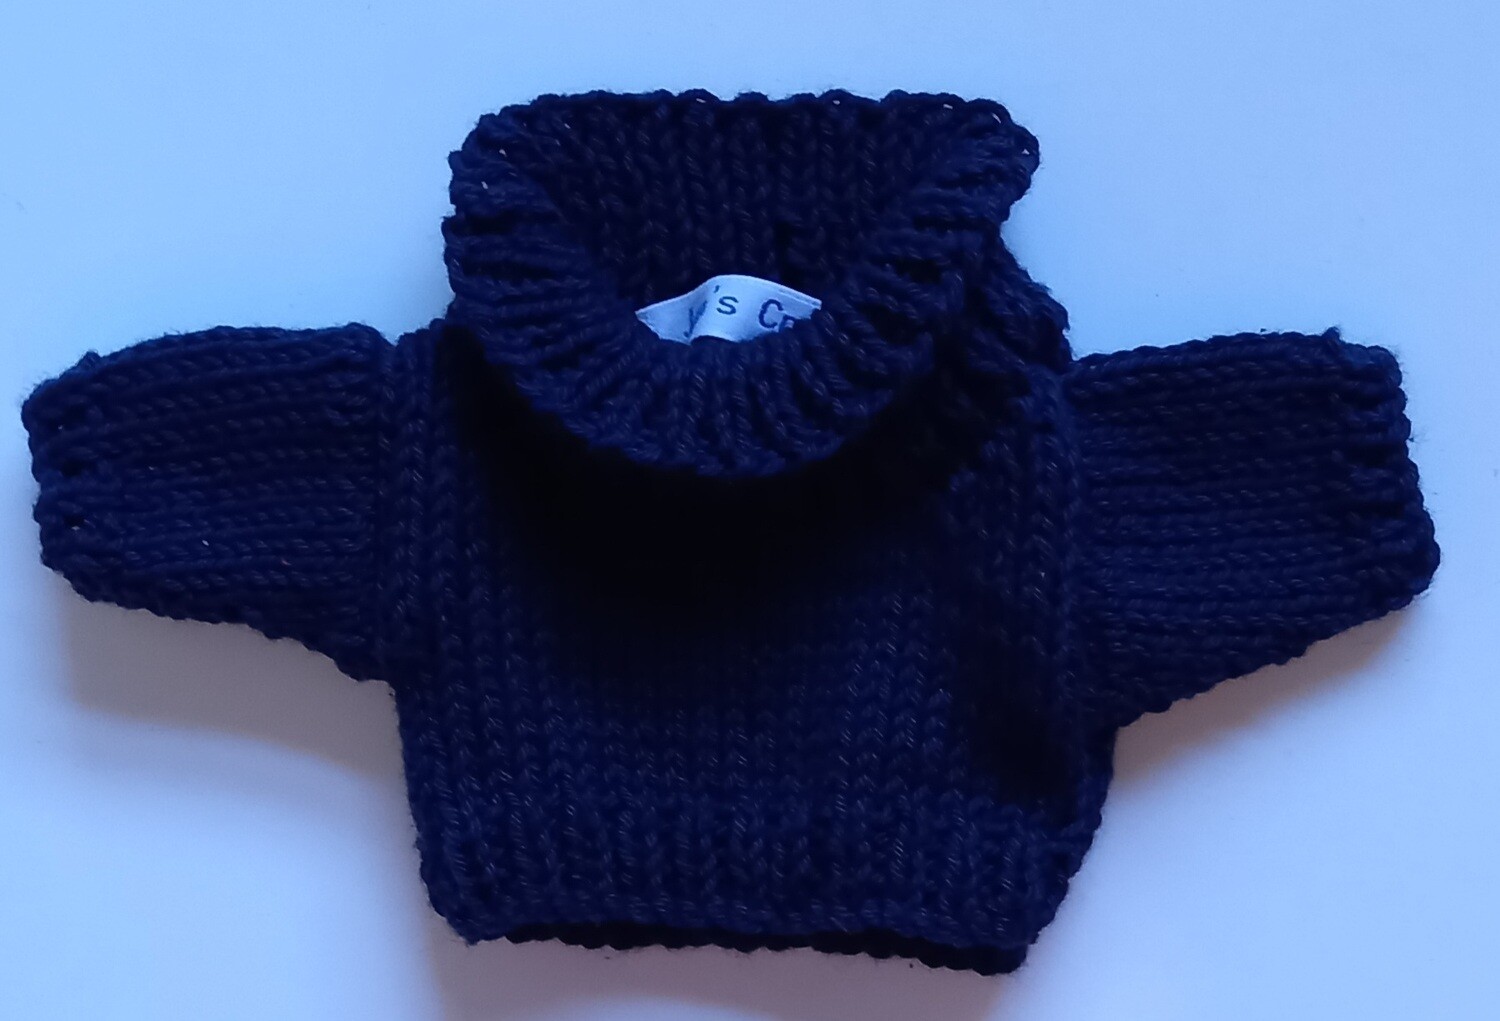 Jumper, navy roll neck - small bear 16cm/ 6 inches high